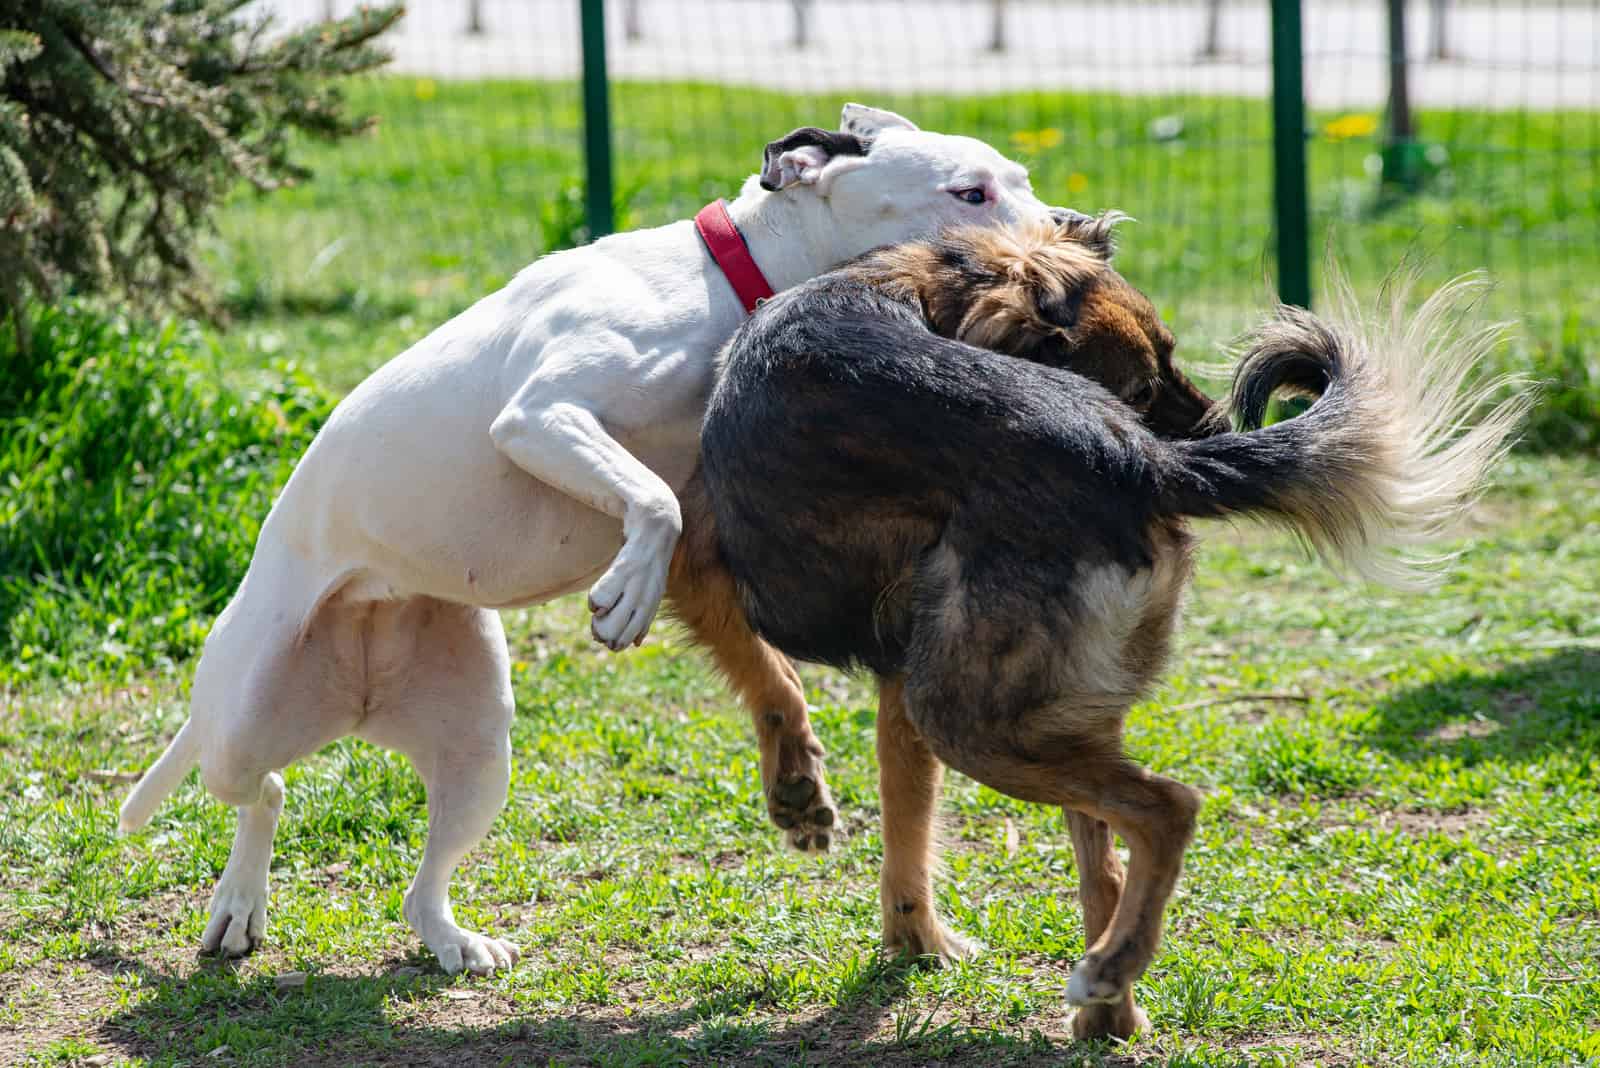 Two dogs are fighting in their play